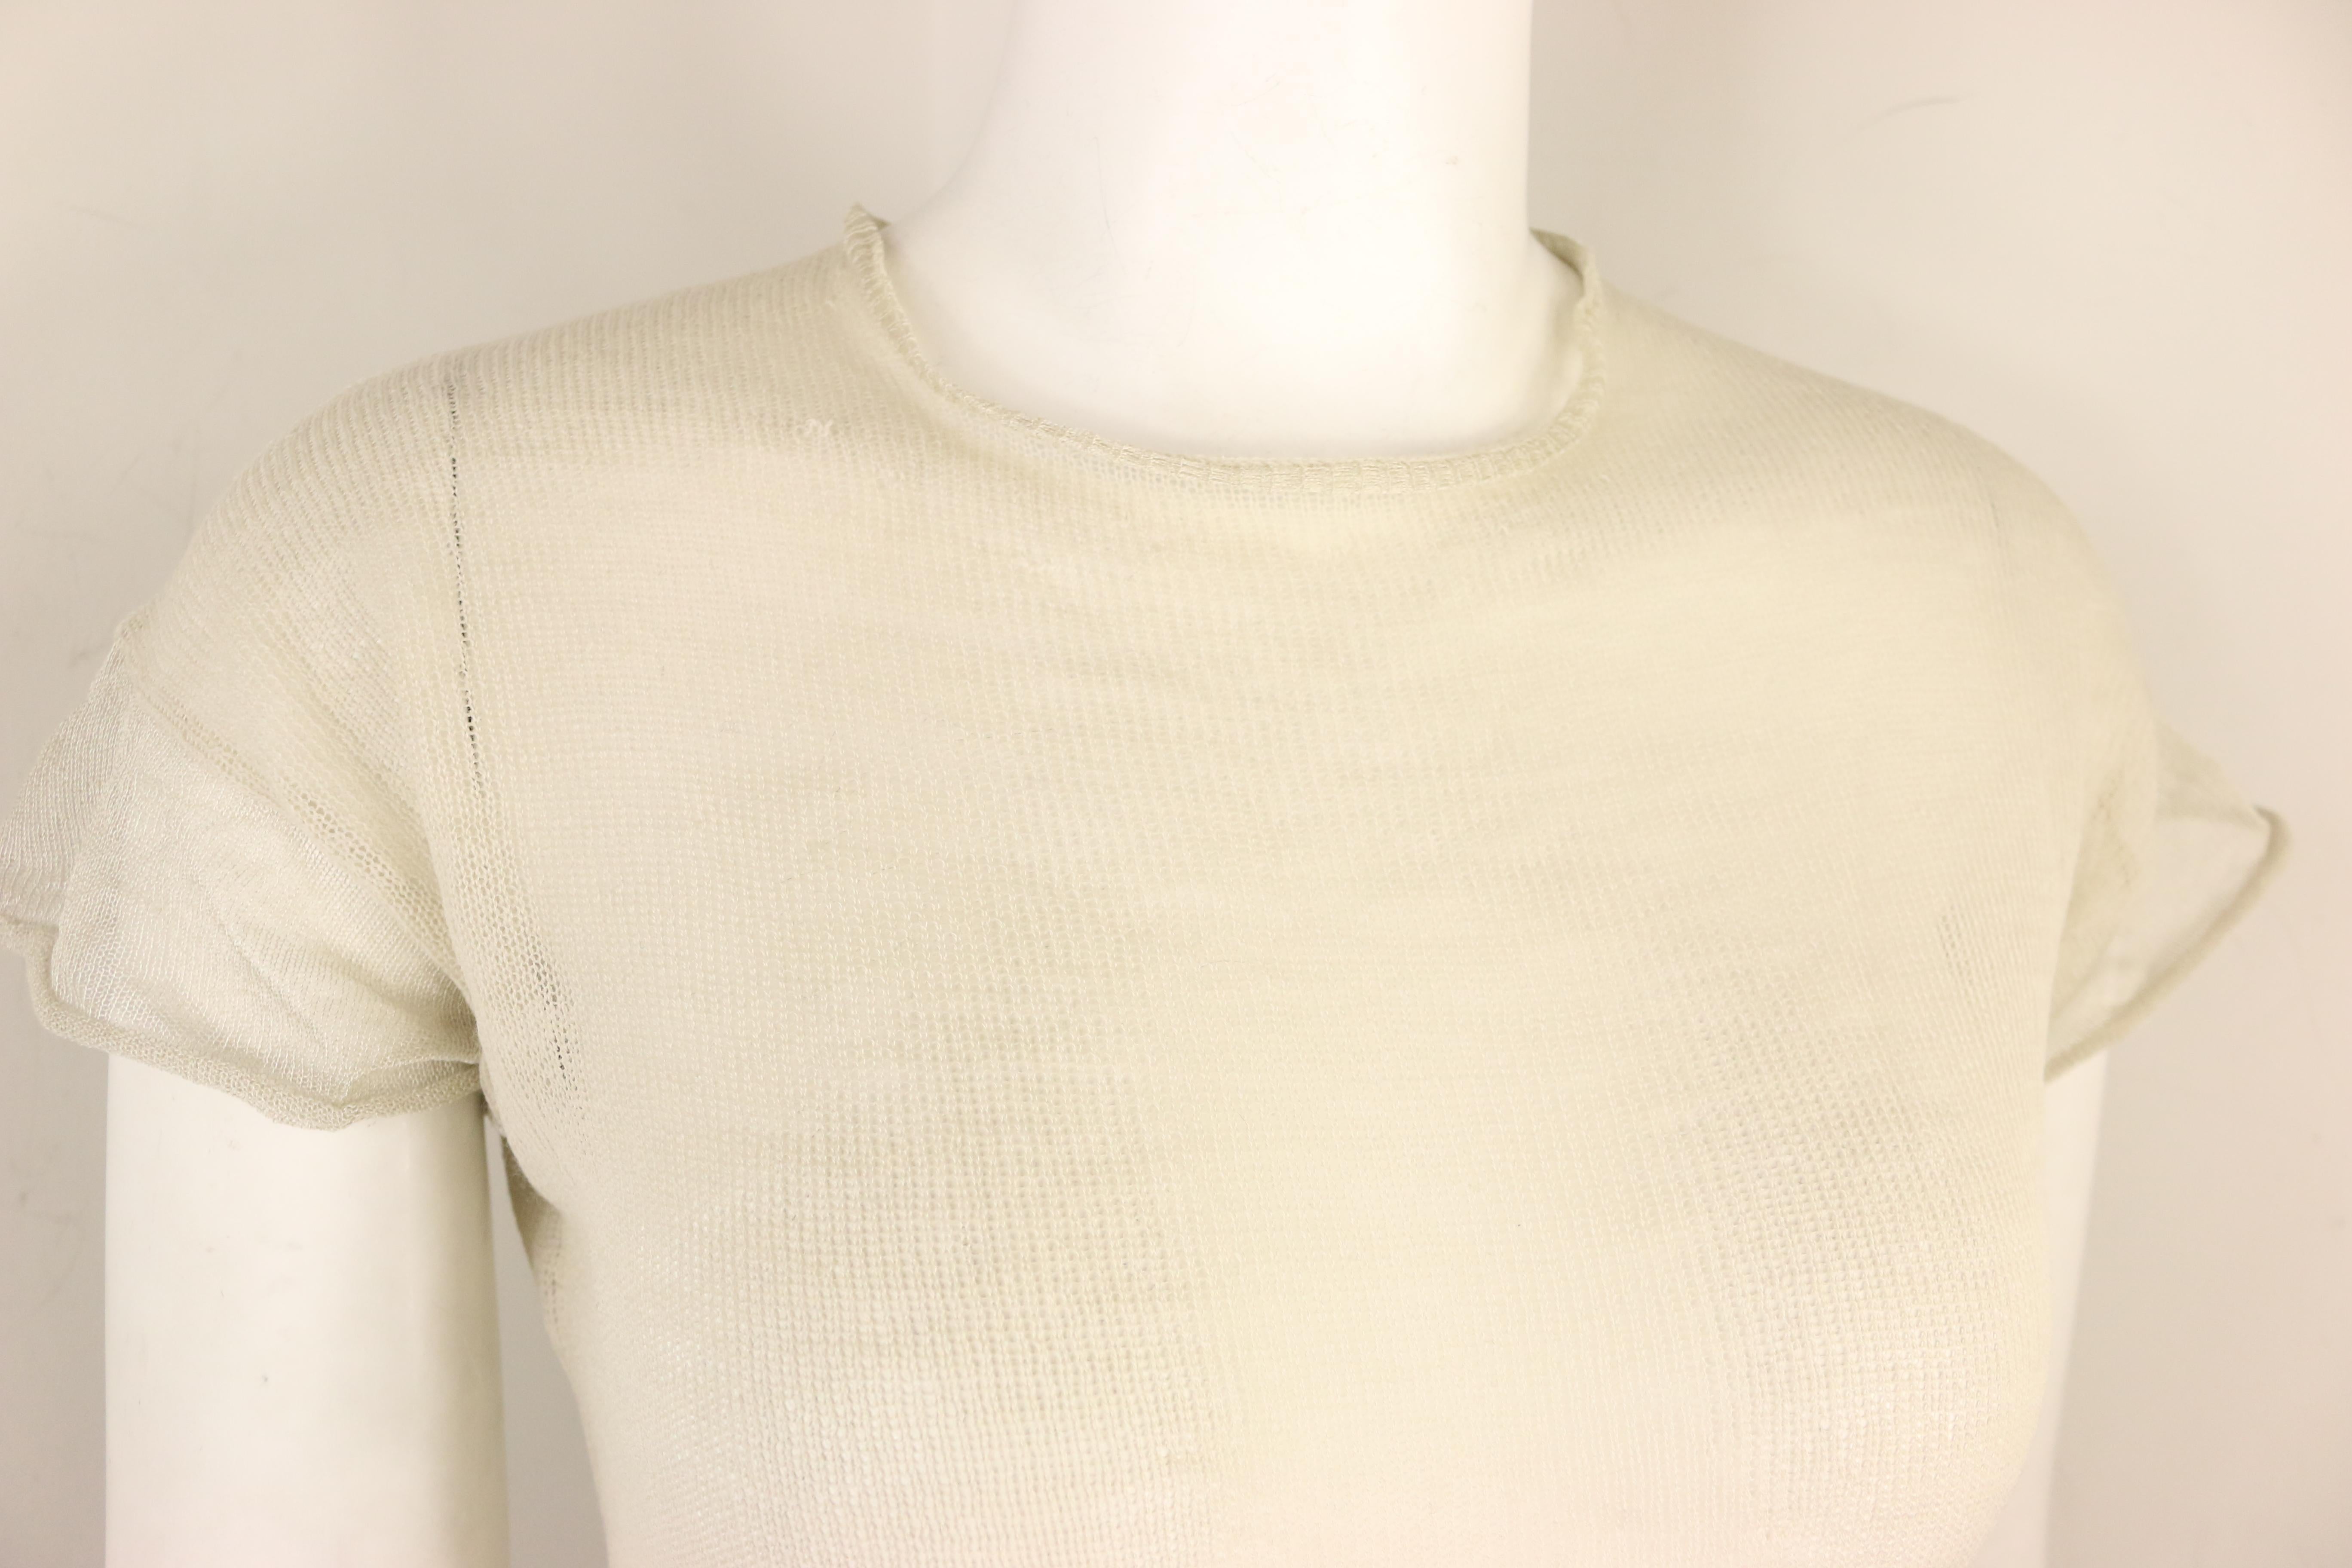 - Vintage 90s Jil Sander wool and silk ivory knitted short sleeves top. This is a fine wool knitted transparent top for summer. This item really shows the minimal effortless signature design and style of Jil Sander! Also, you can pair it with jeans.